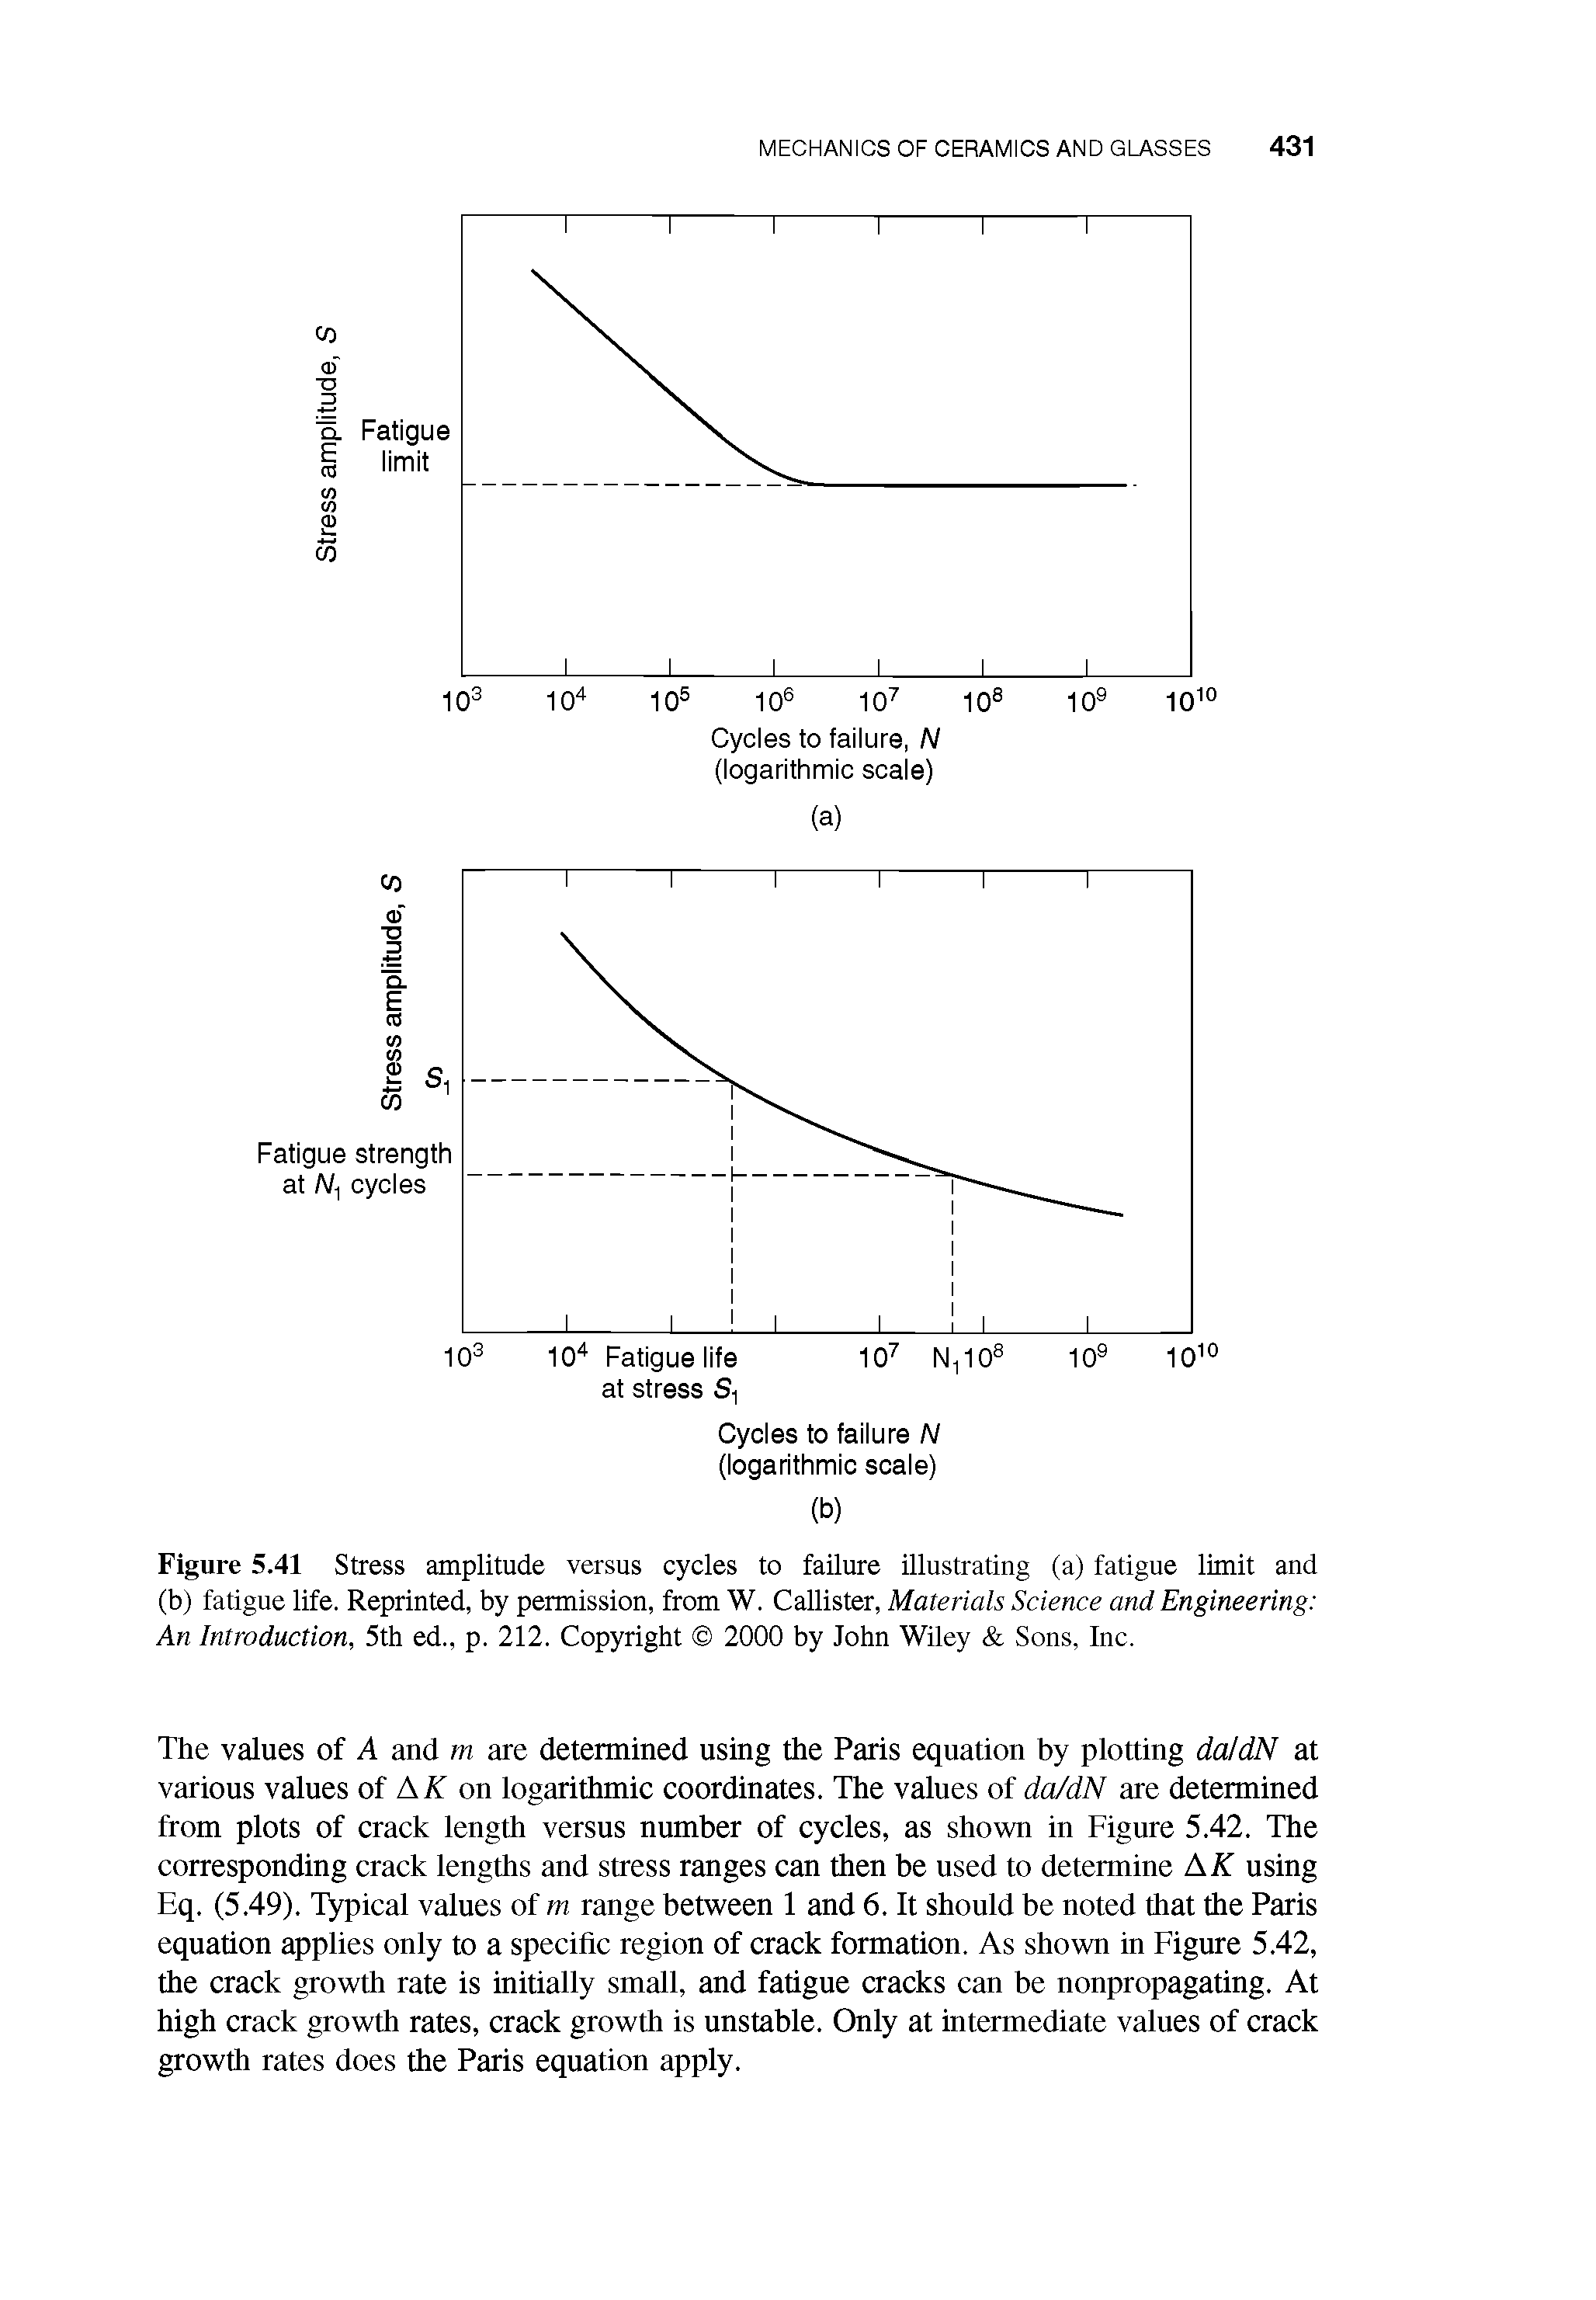 Figure 5.41 Stress amplitude versus cycles to failure illustrating (a) fatigue limit and (b) fatigue life. Reprinted, by permission, from W. Callister, Materials Science and Engineering An Introduction, 5th ed., p. 212. Copyright 2000 by John Wiley Sons, Inc.